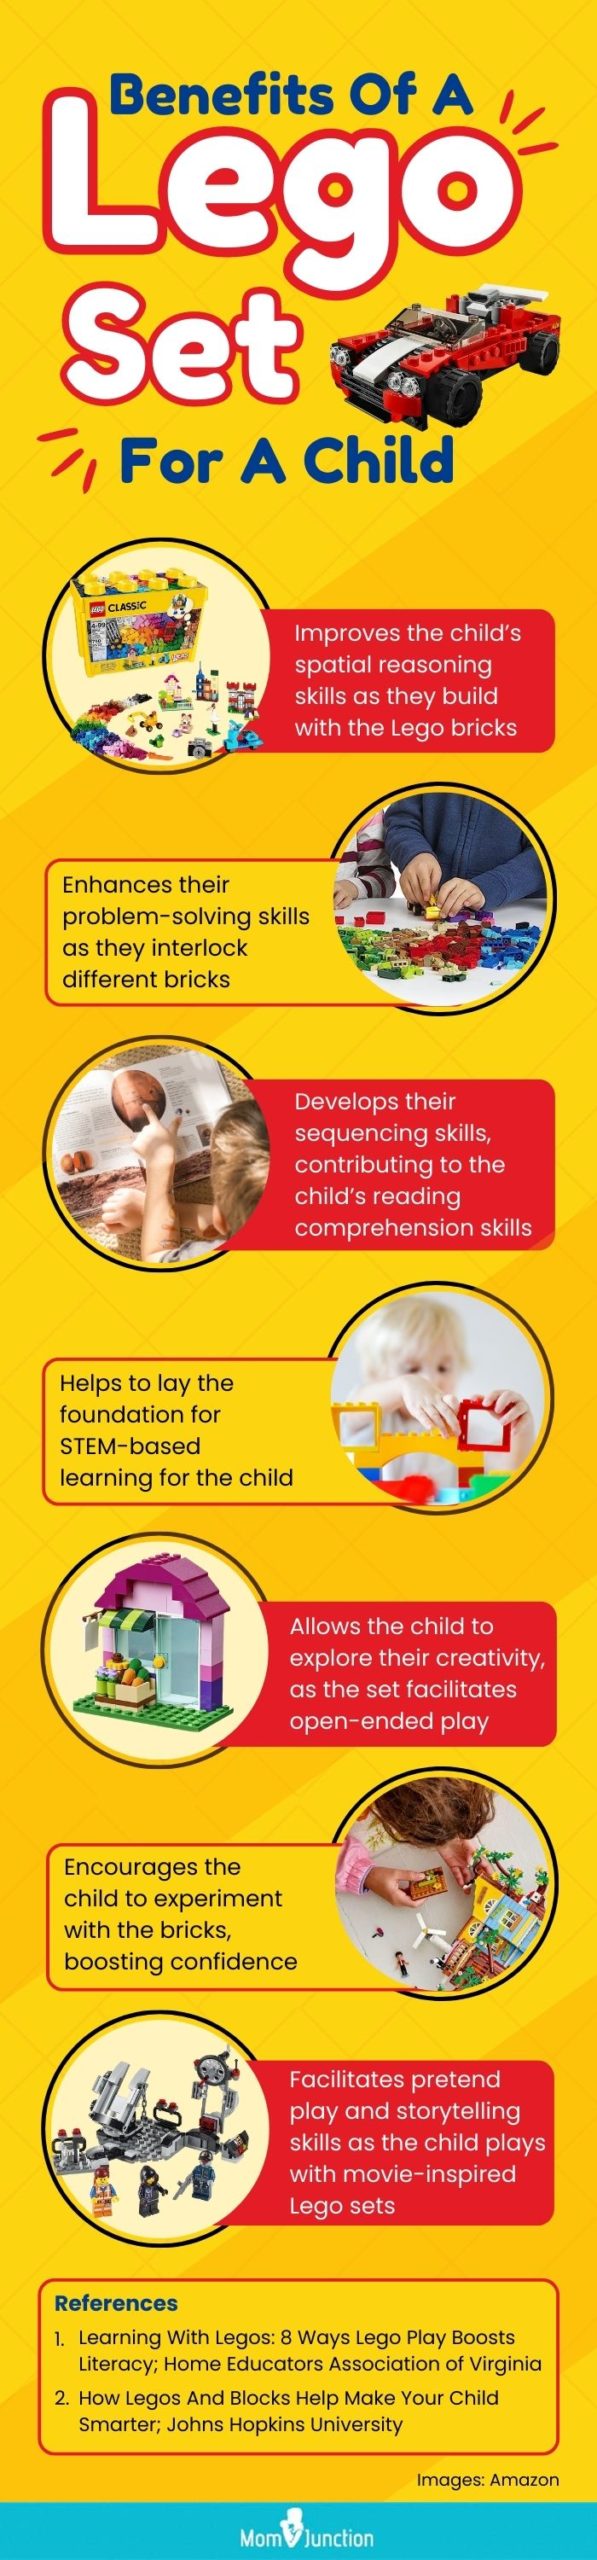 Benefits Of A Lego Set For A Child (infographic)